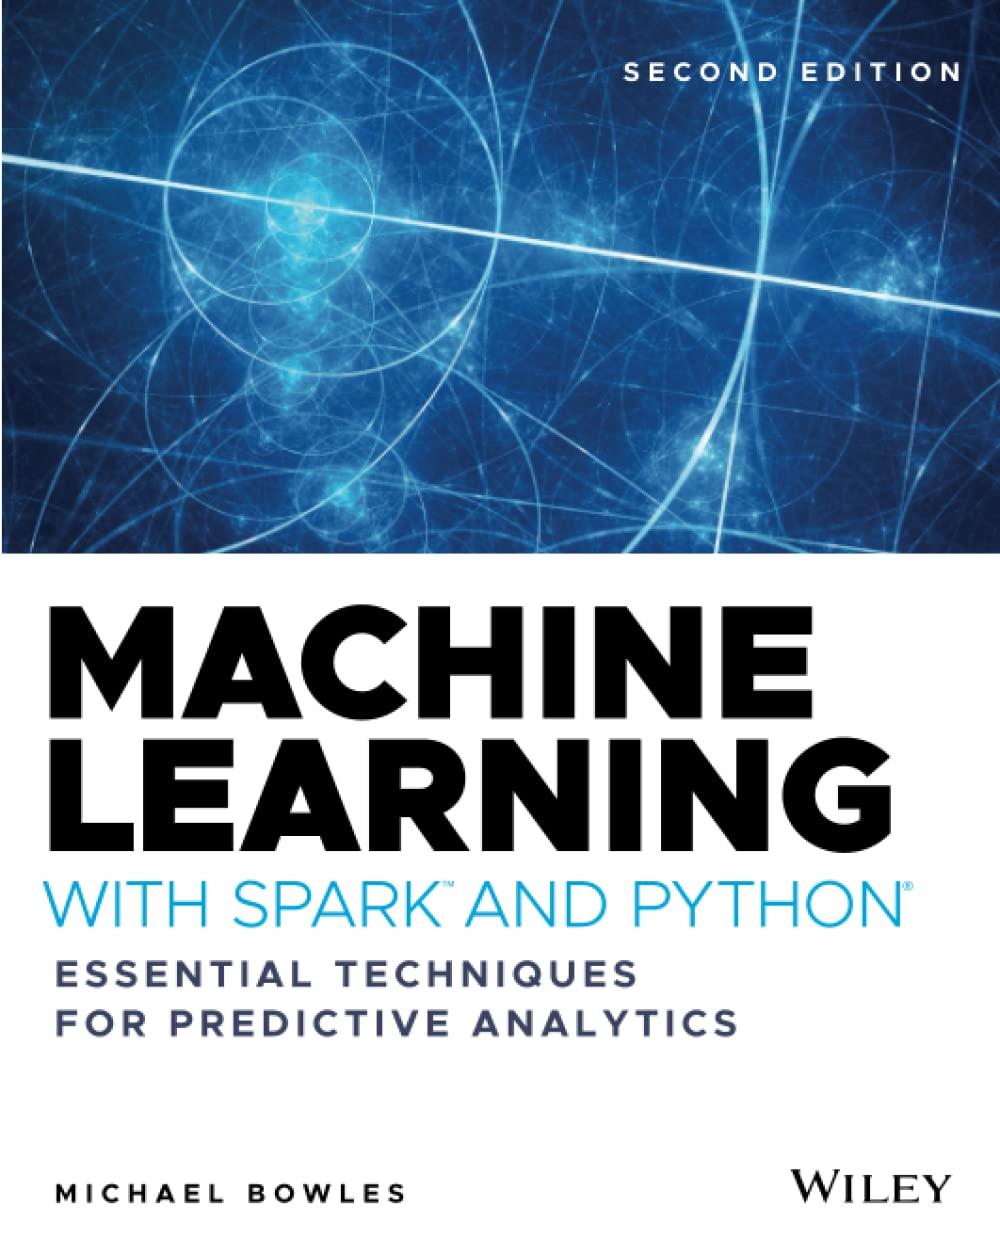 machine learning with spark and python  essential techniques for predictive analytics 2nd edition michael